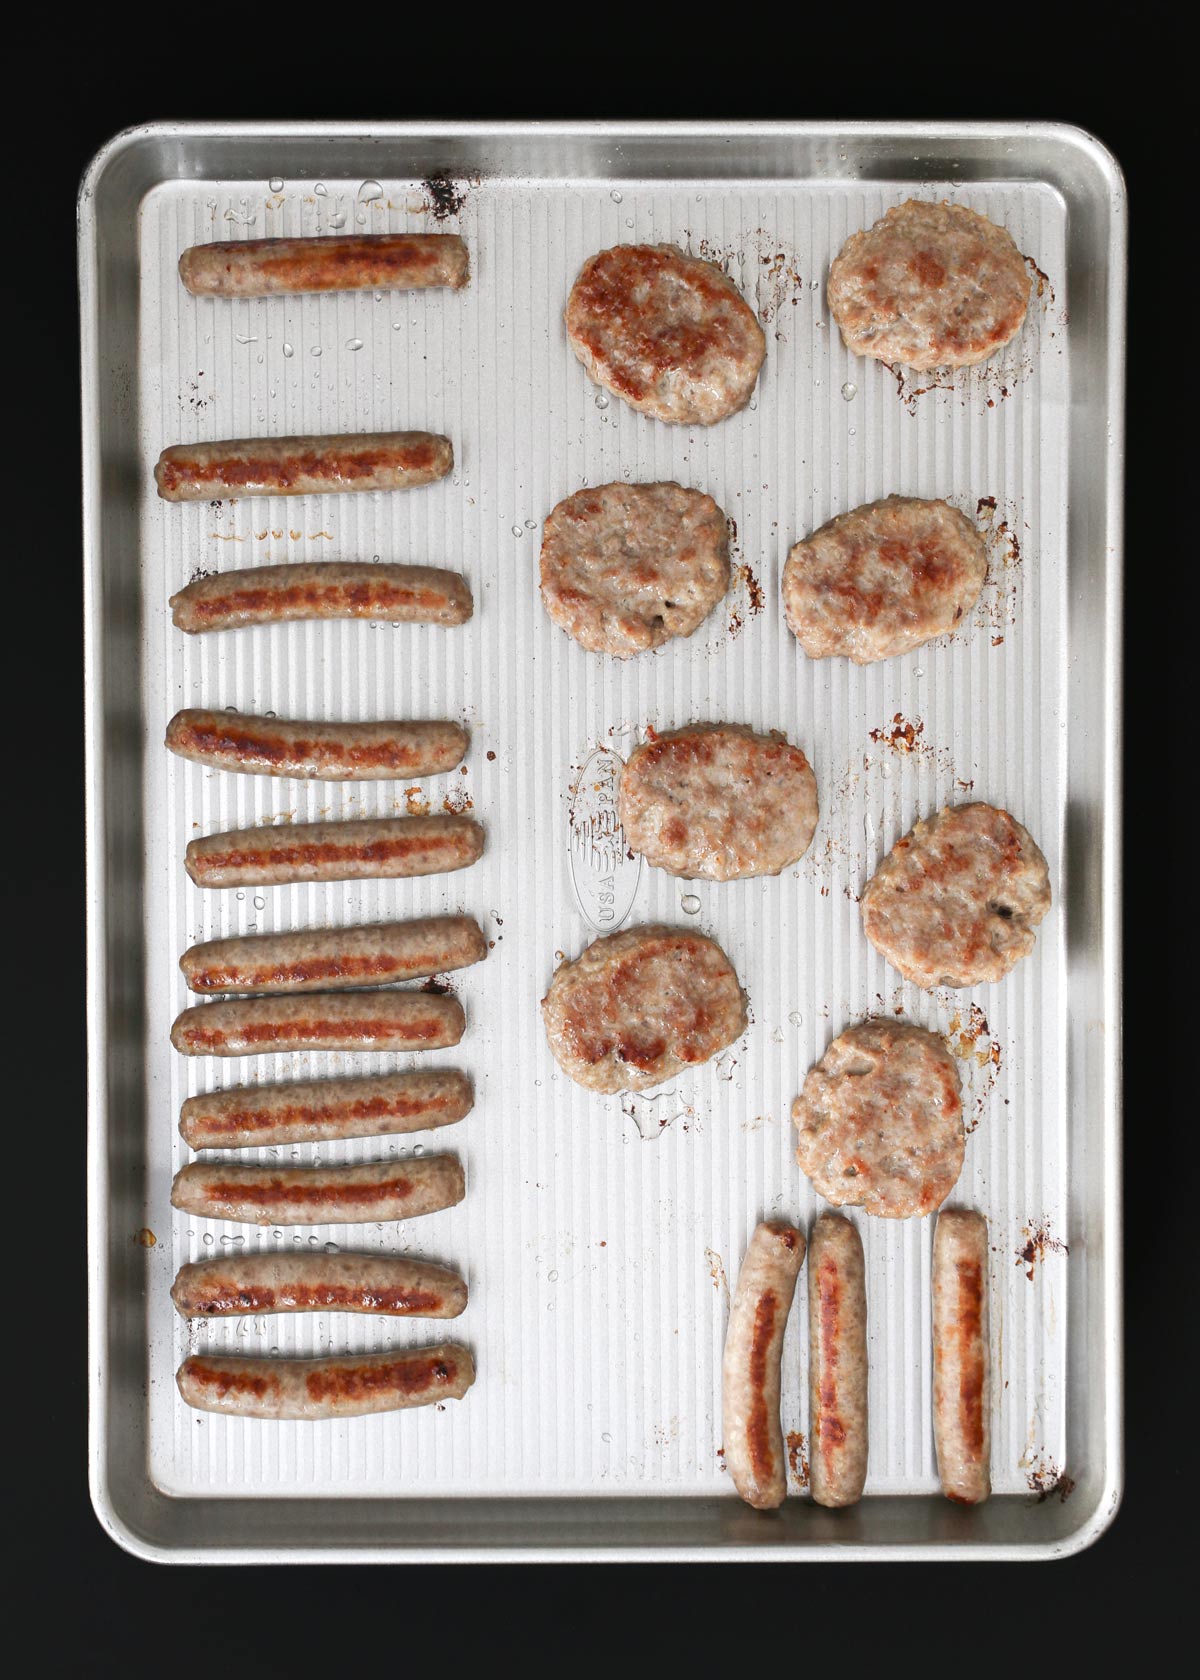 cooked sausage on the sheet pan.